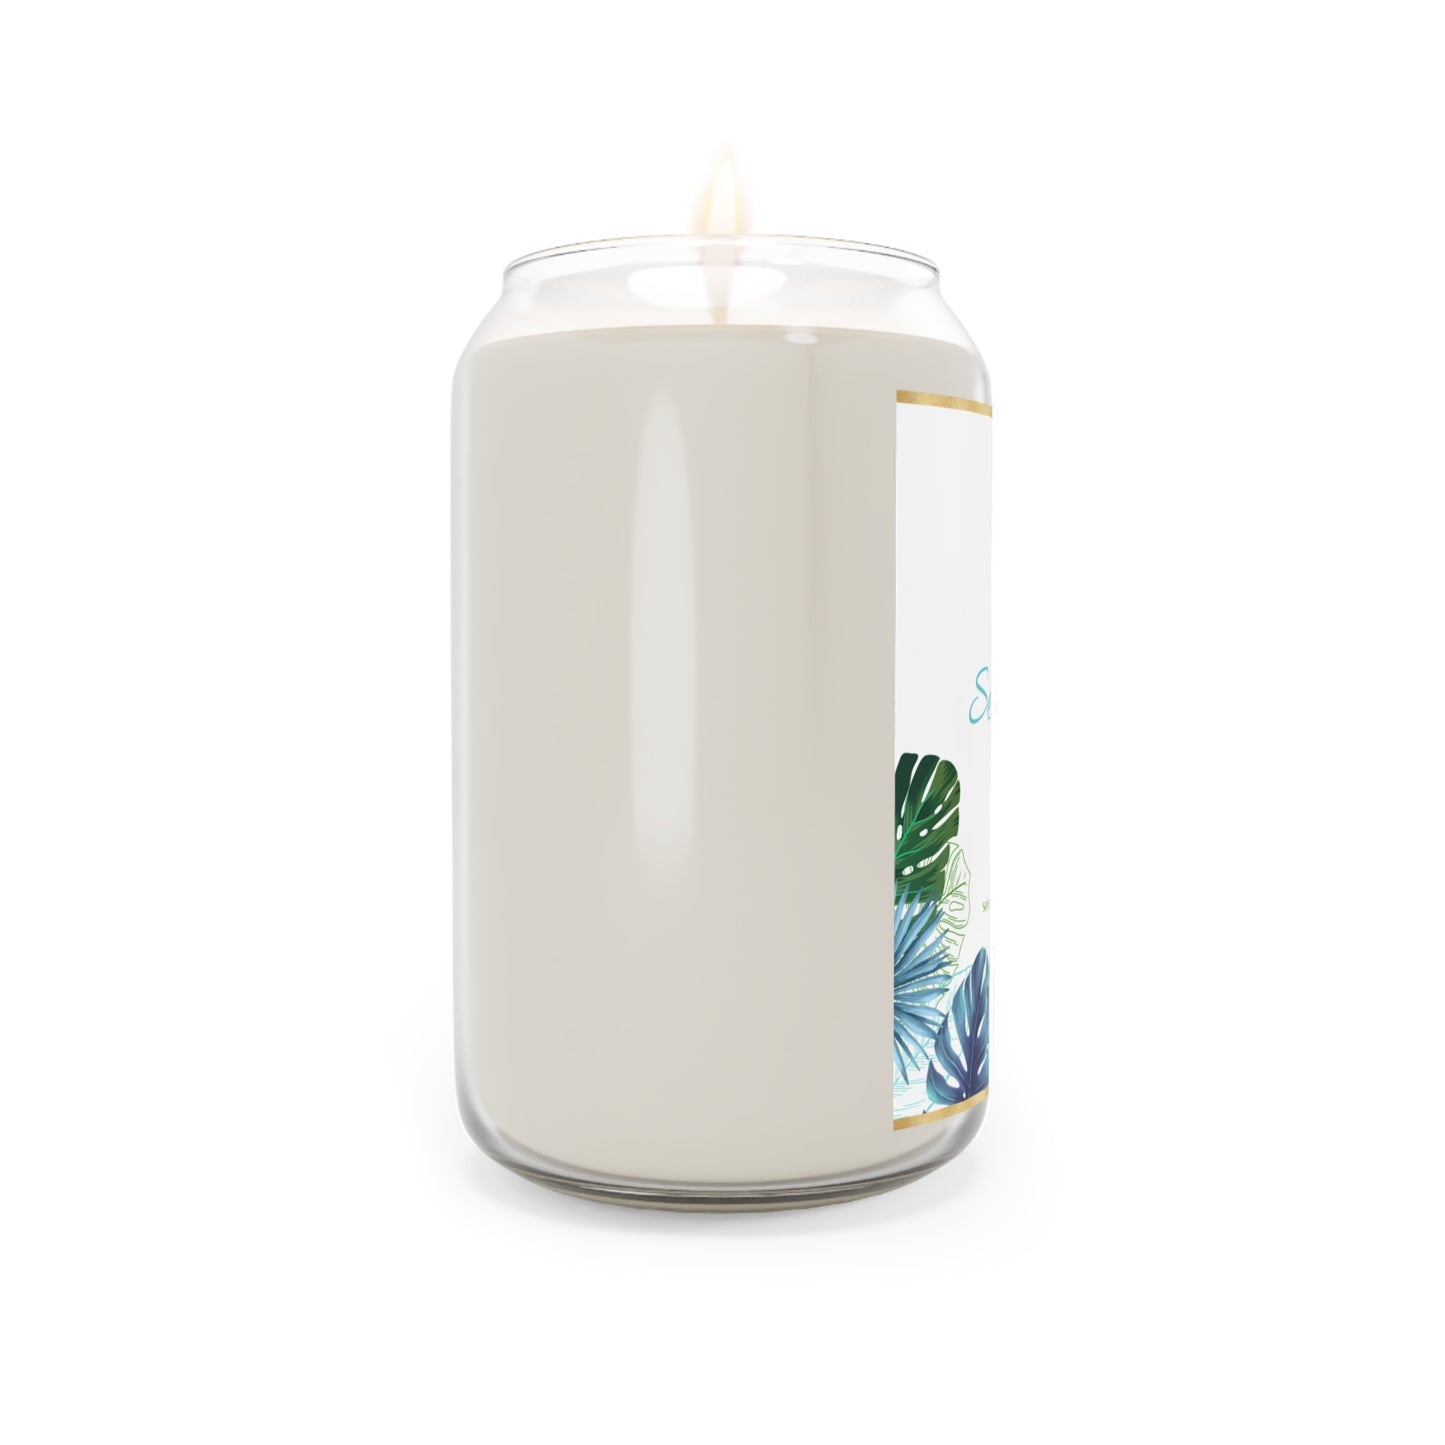 Sea Breeze Soy Candle